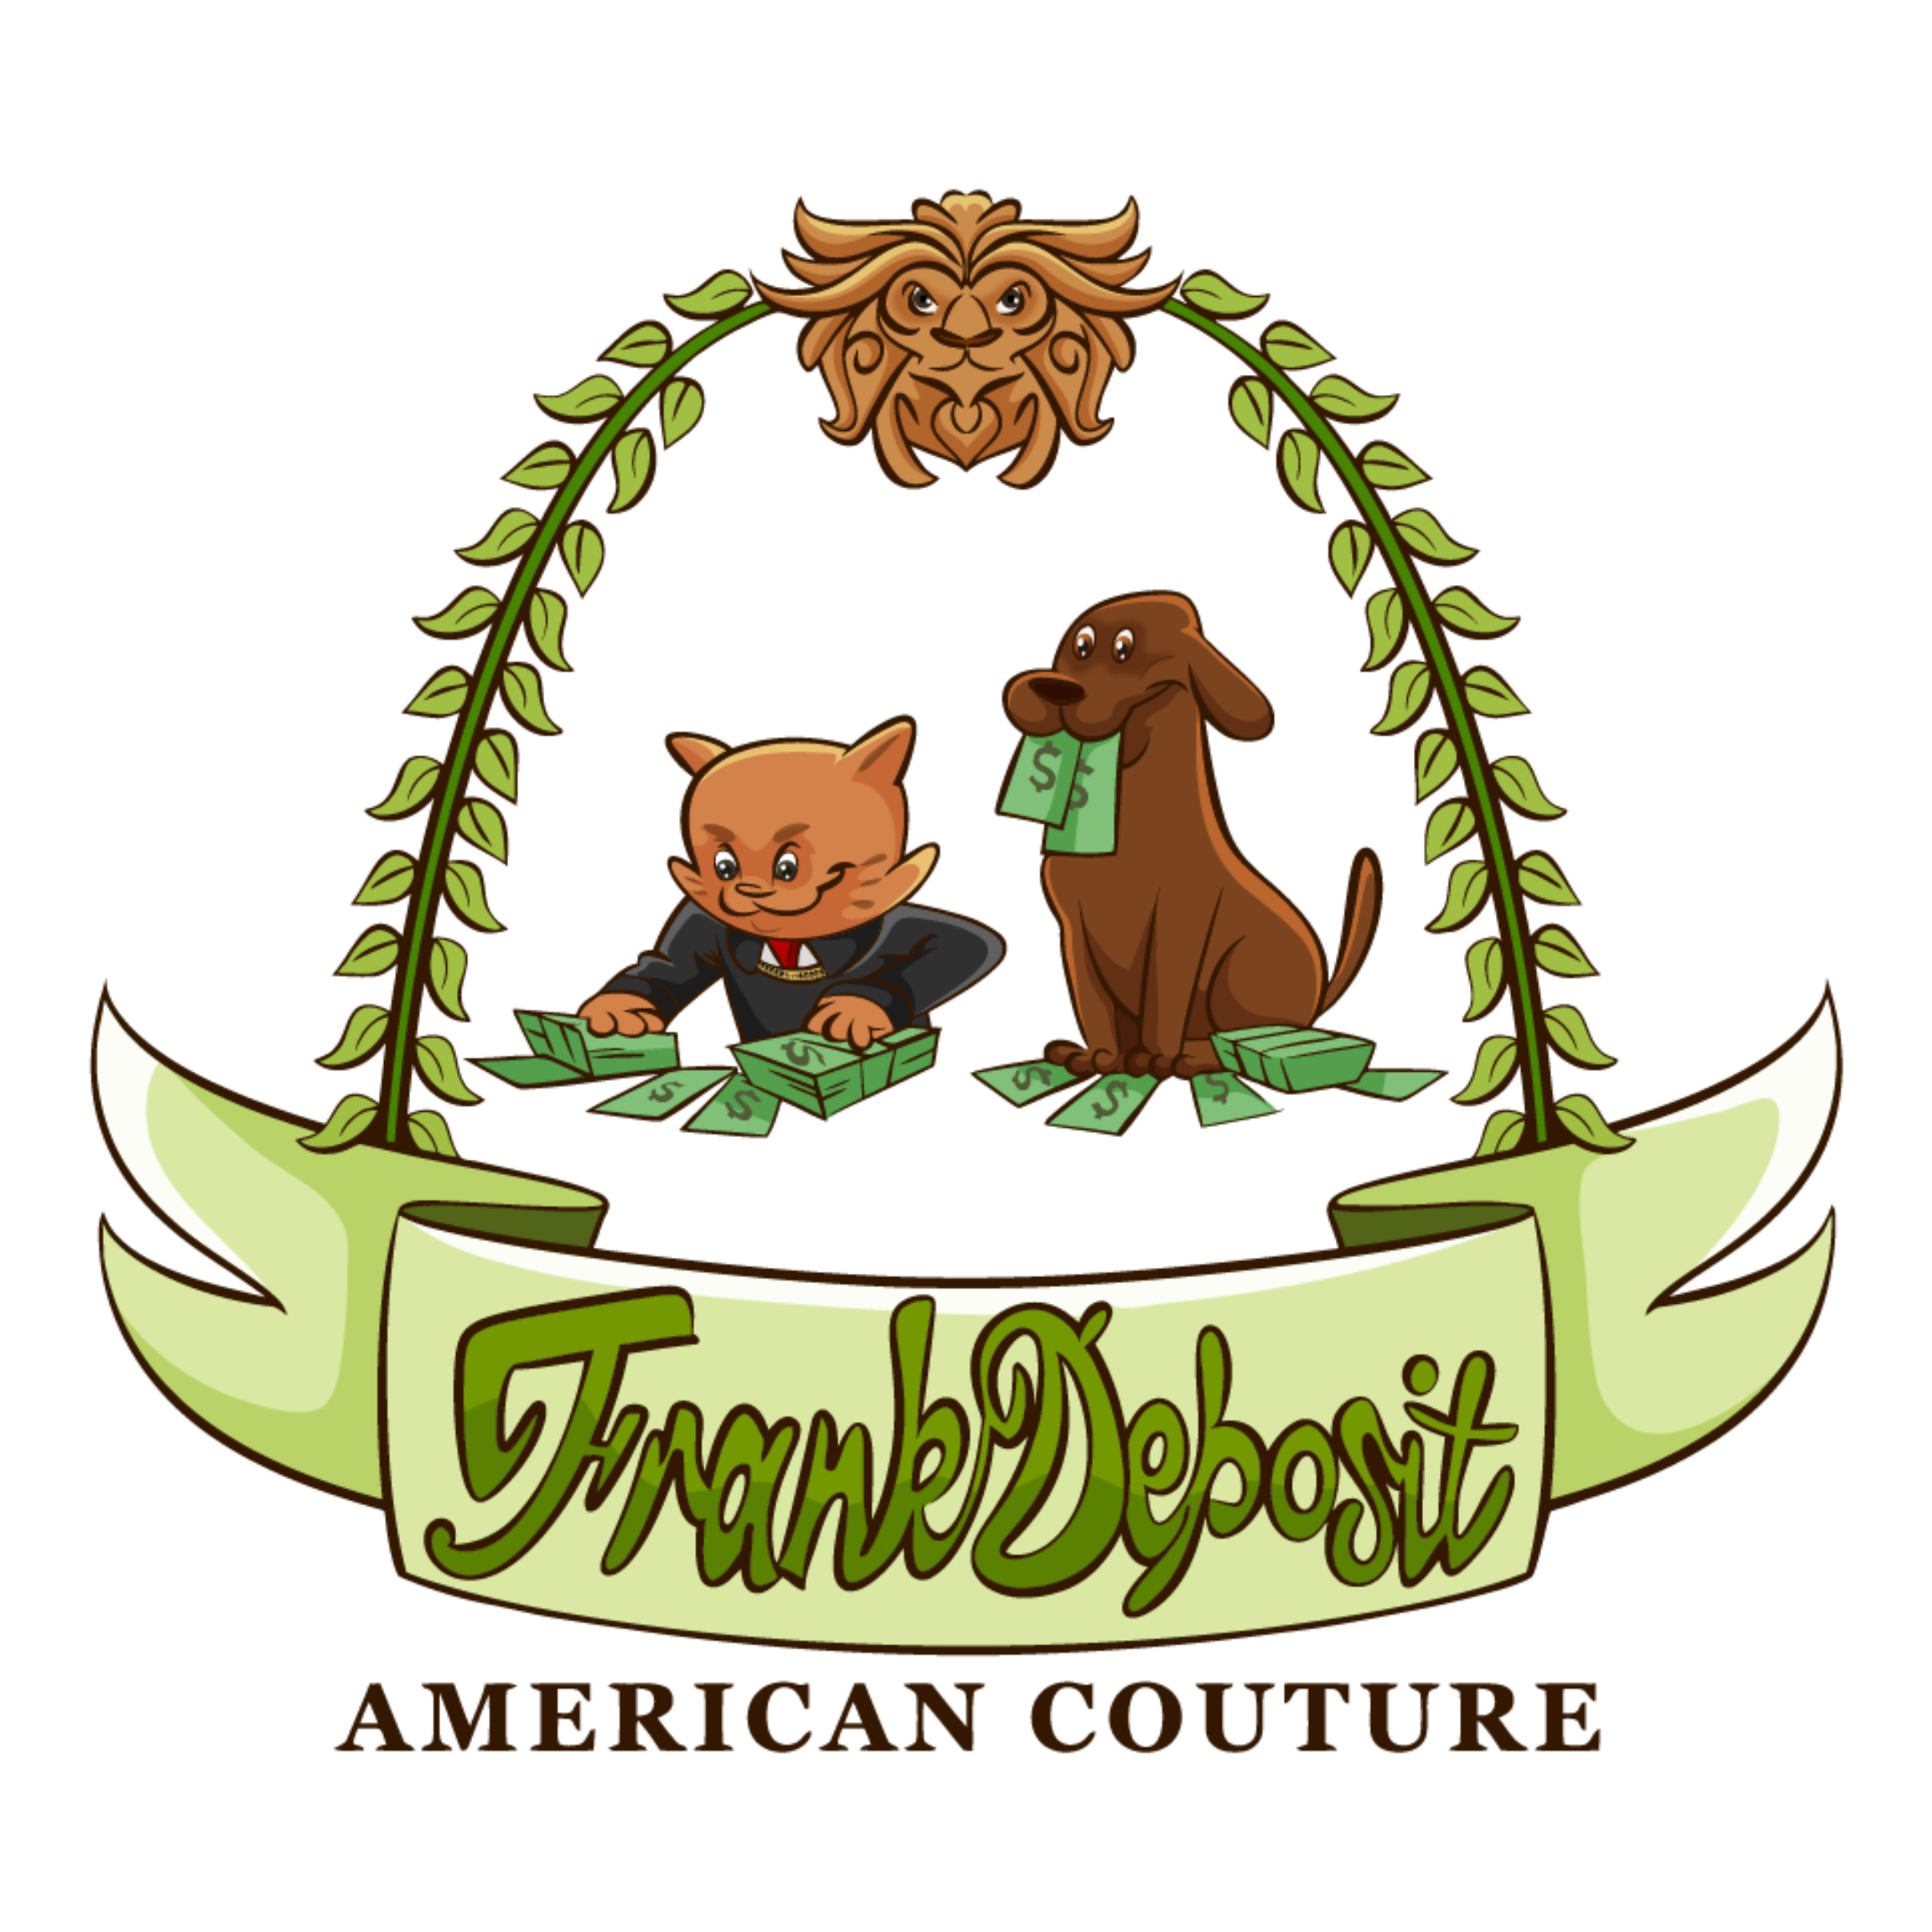 Frank Deposit American Couture